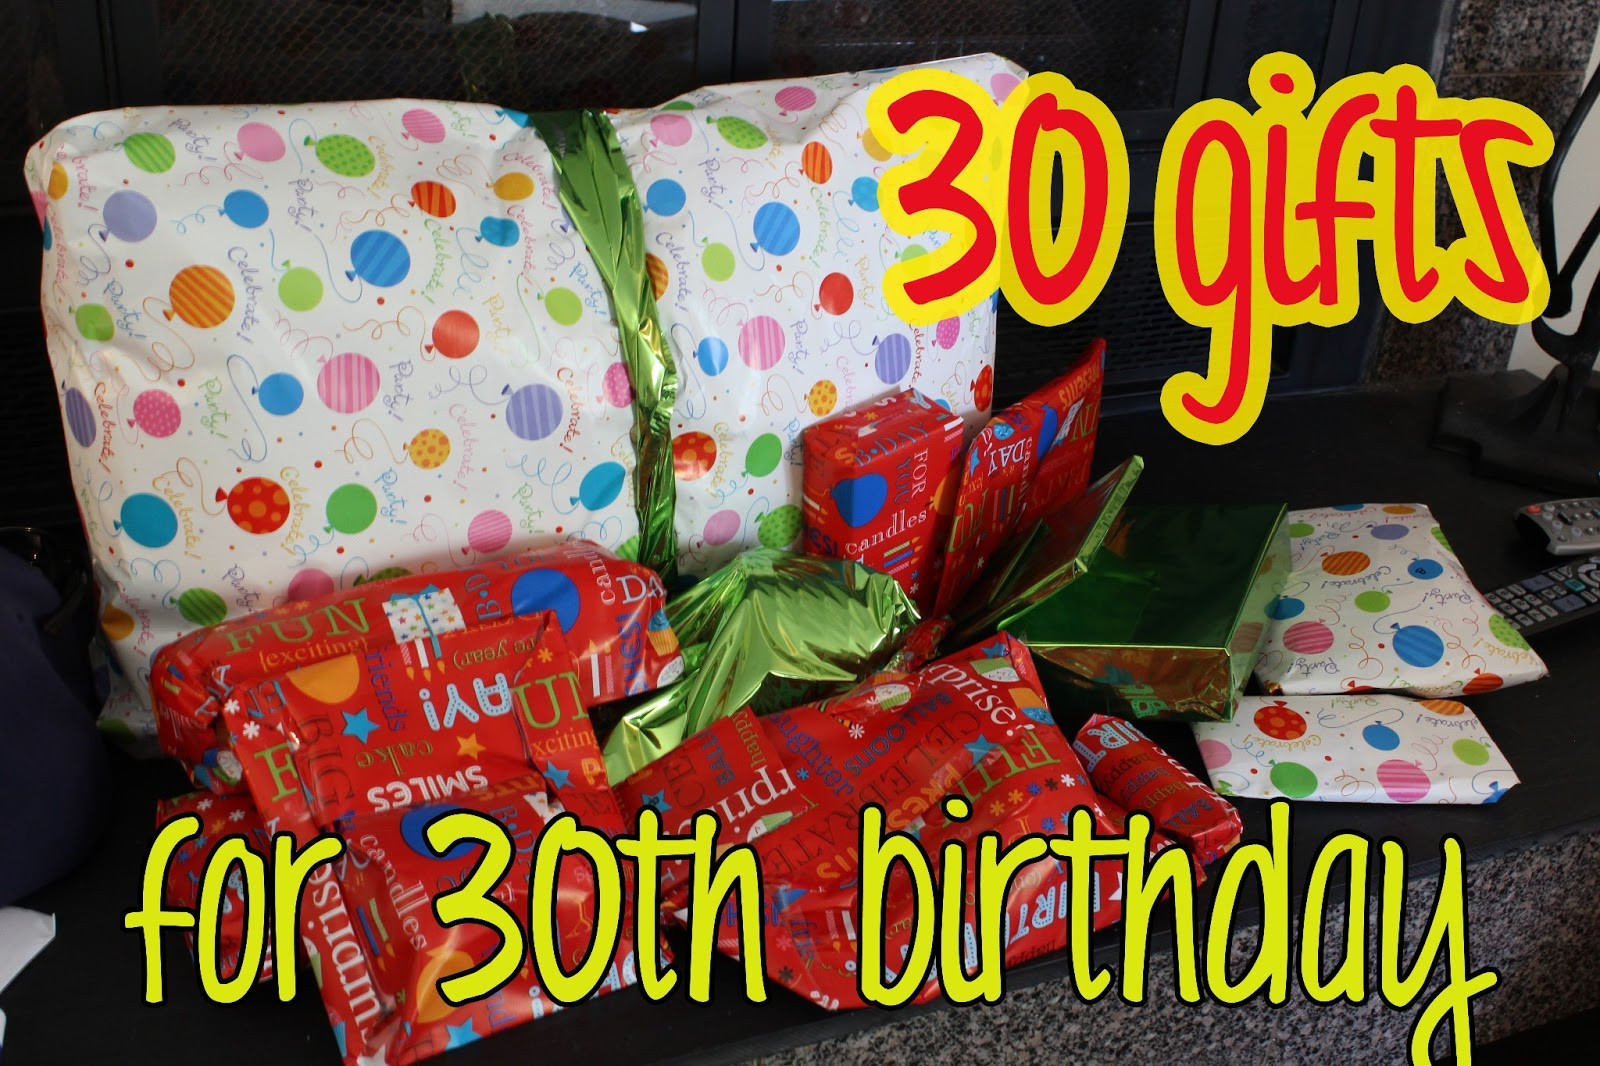 30 Gifts For 30th Birthday For Her
 love elizabethany t idea 30 ts for 30th birthday